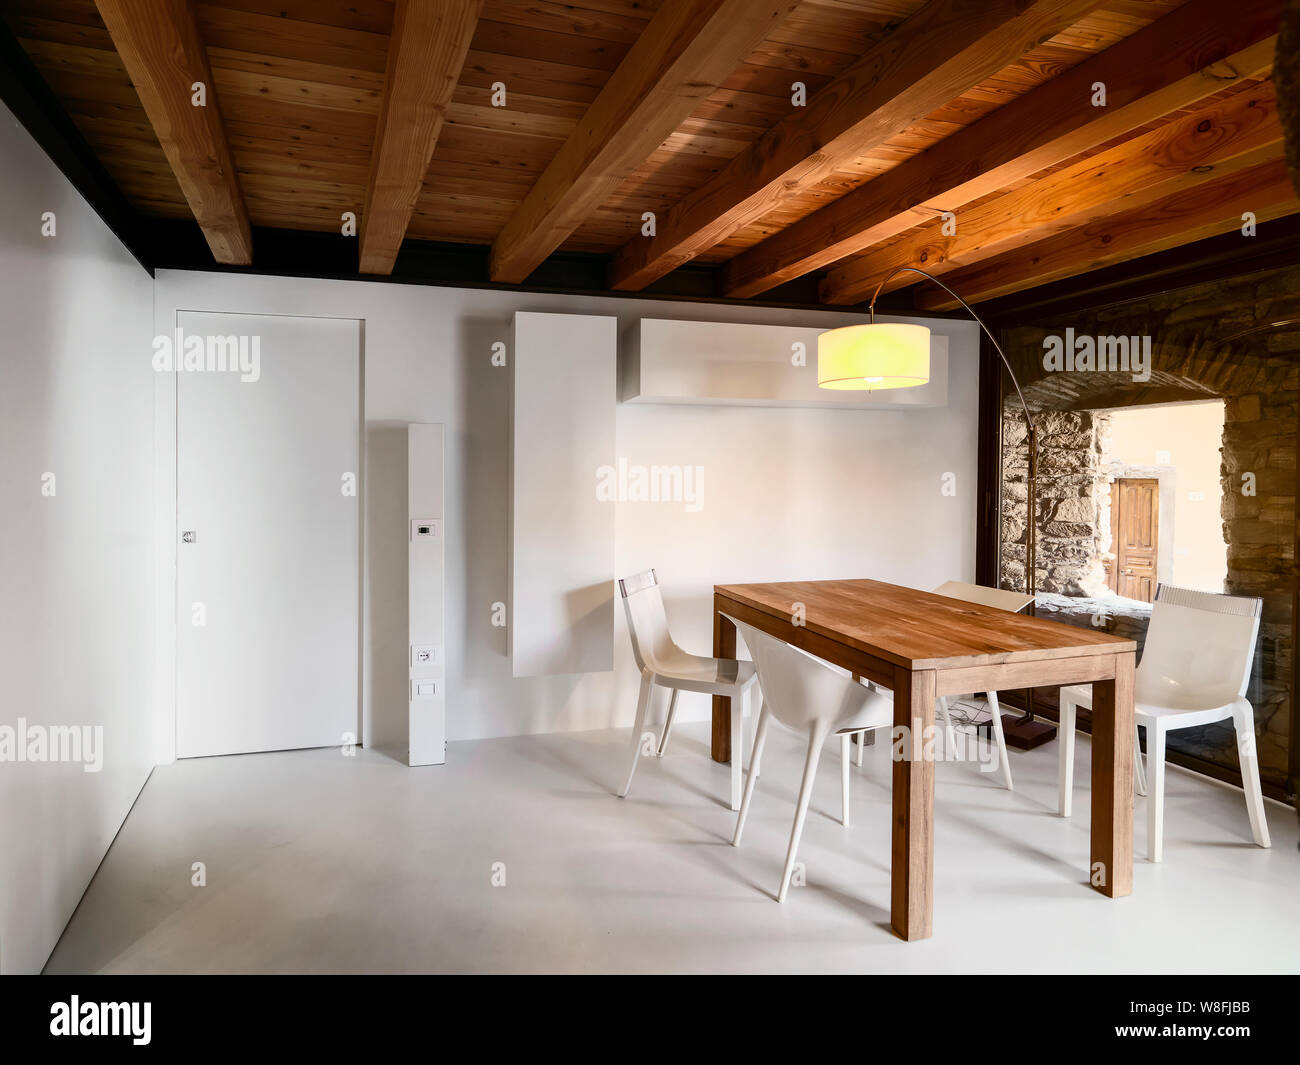 interior shots of a modern dining room with wooden table the ceiling made of wood and the floor made of resin Stock Photo